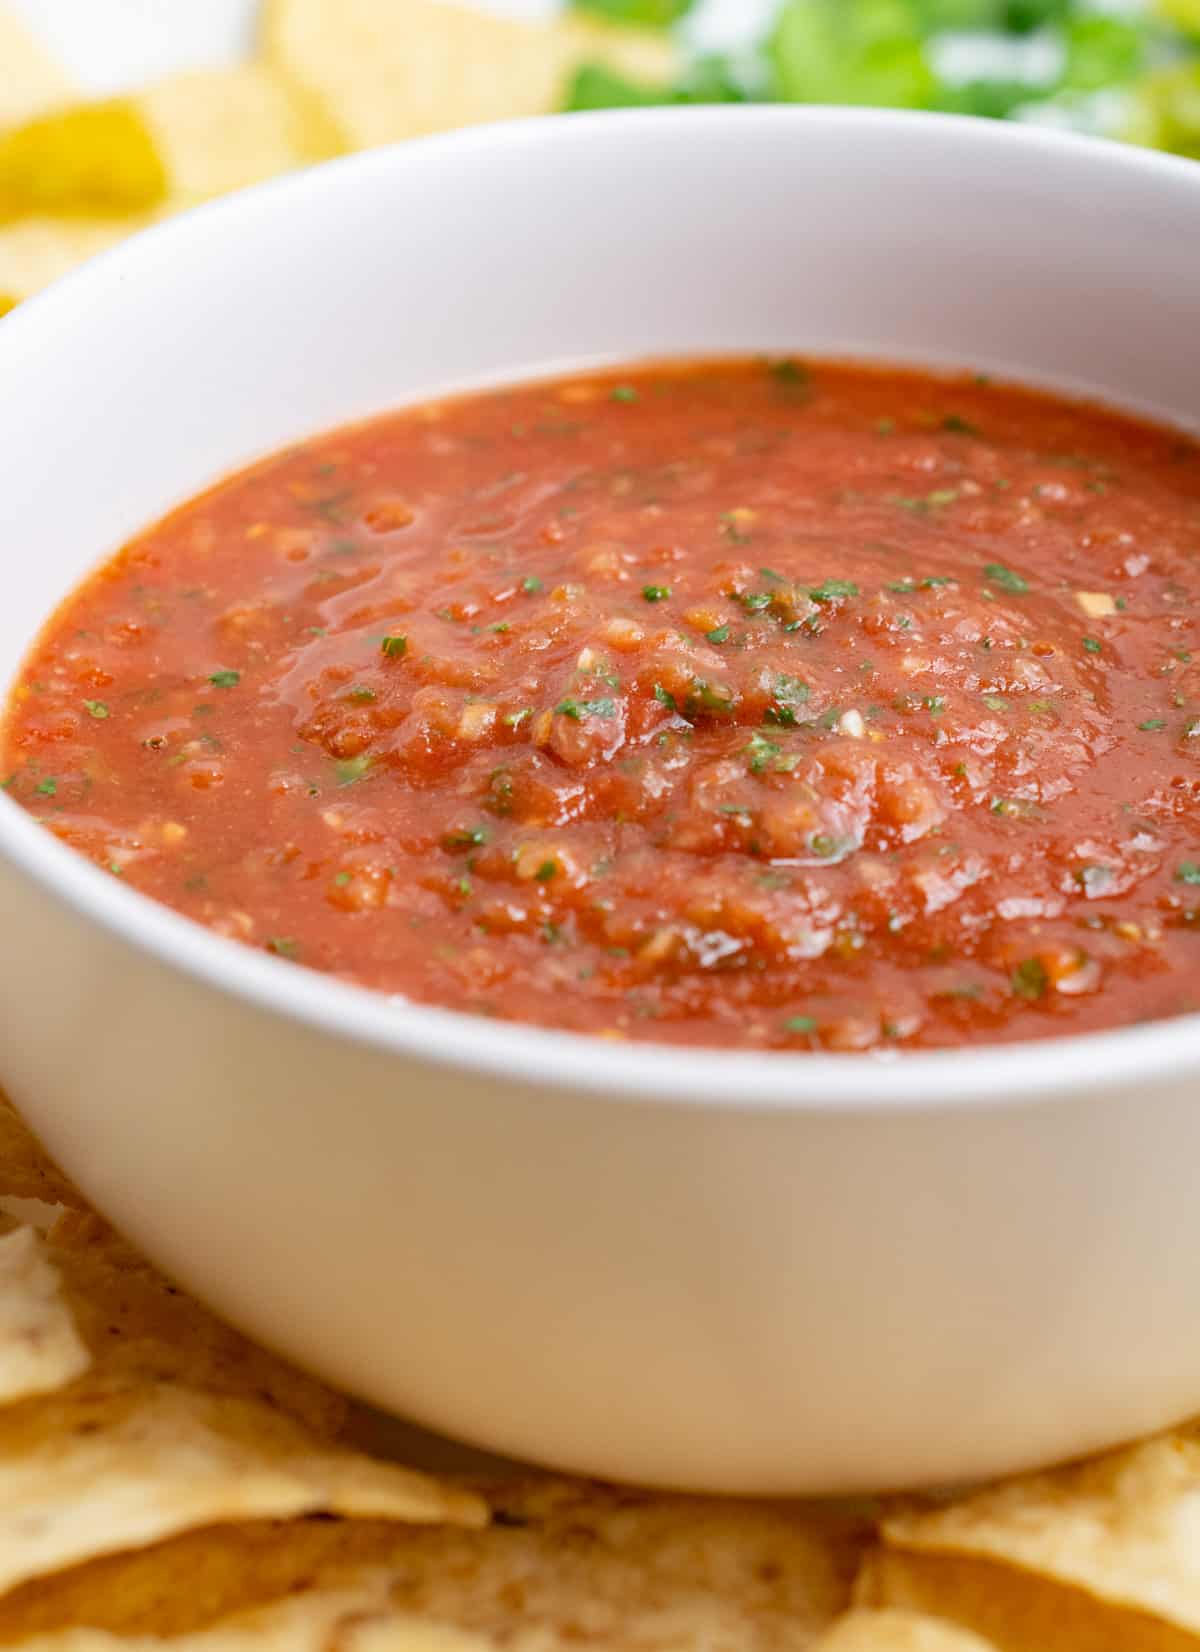 Easy restaurant style salsa in a white bowl.